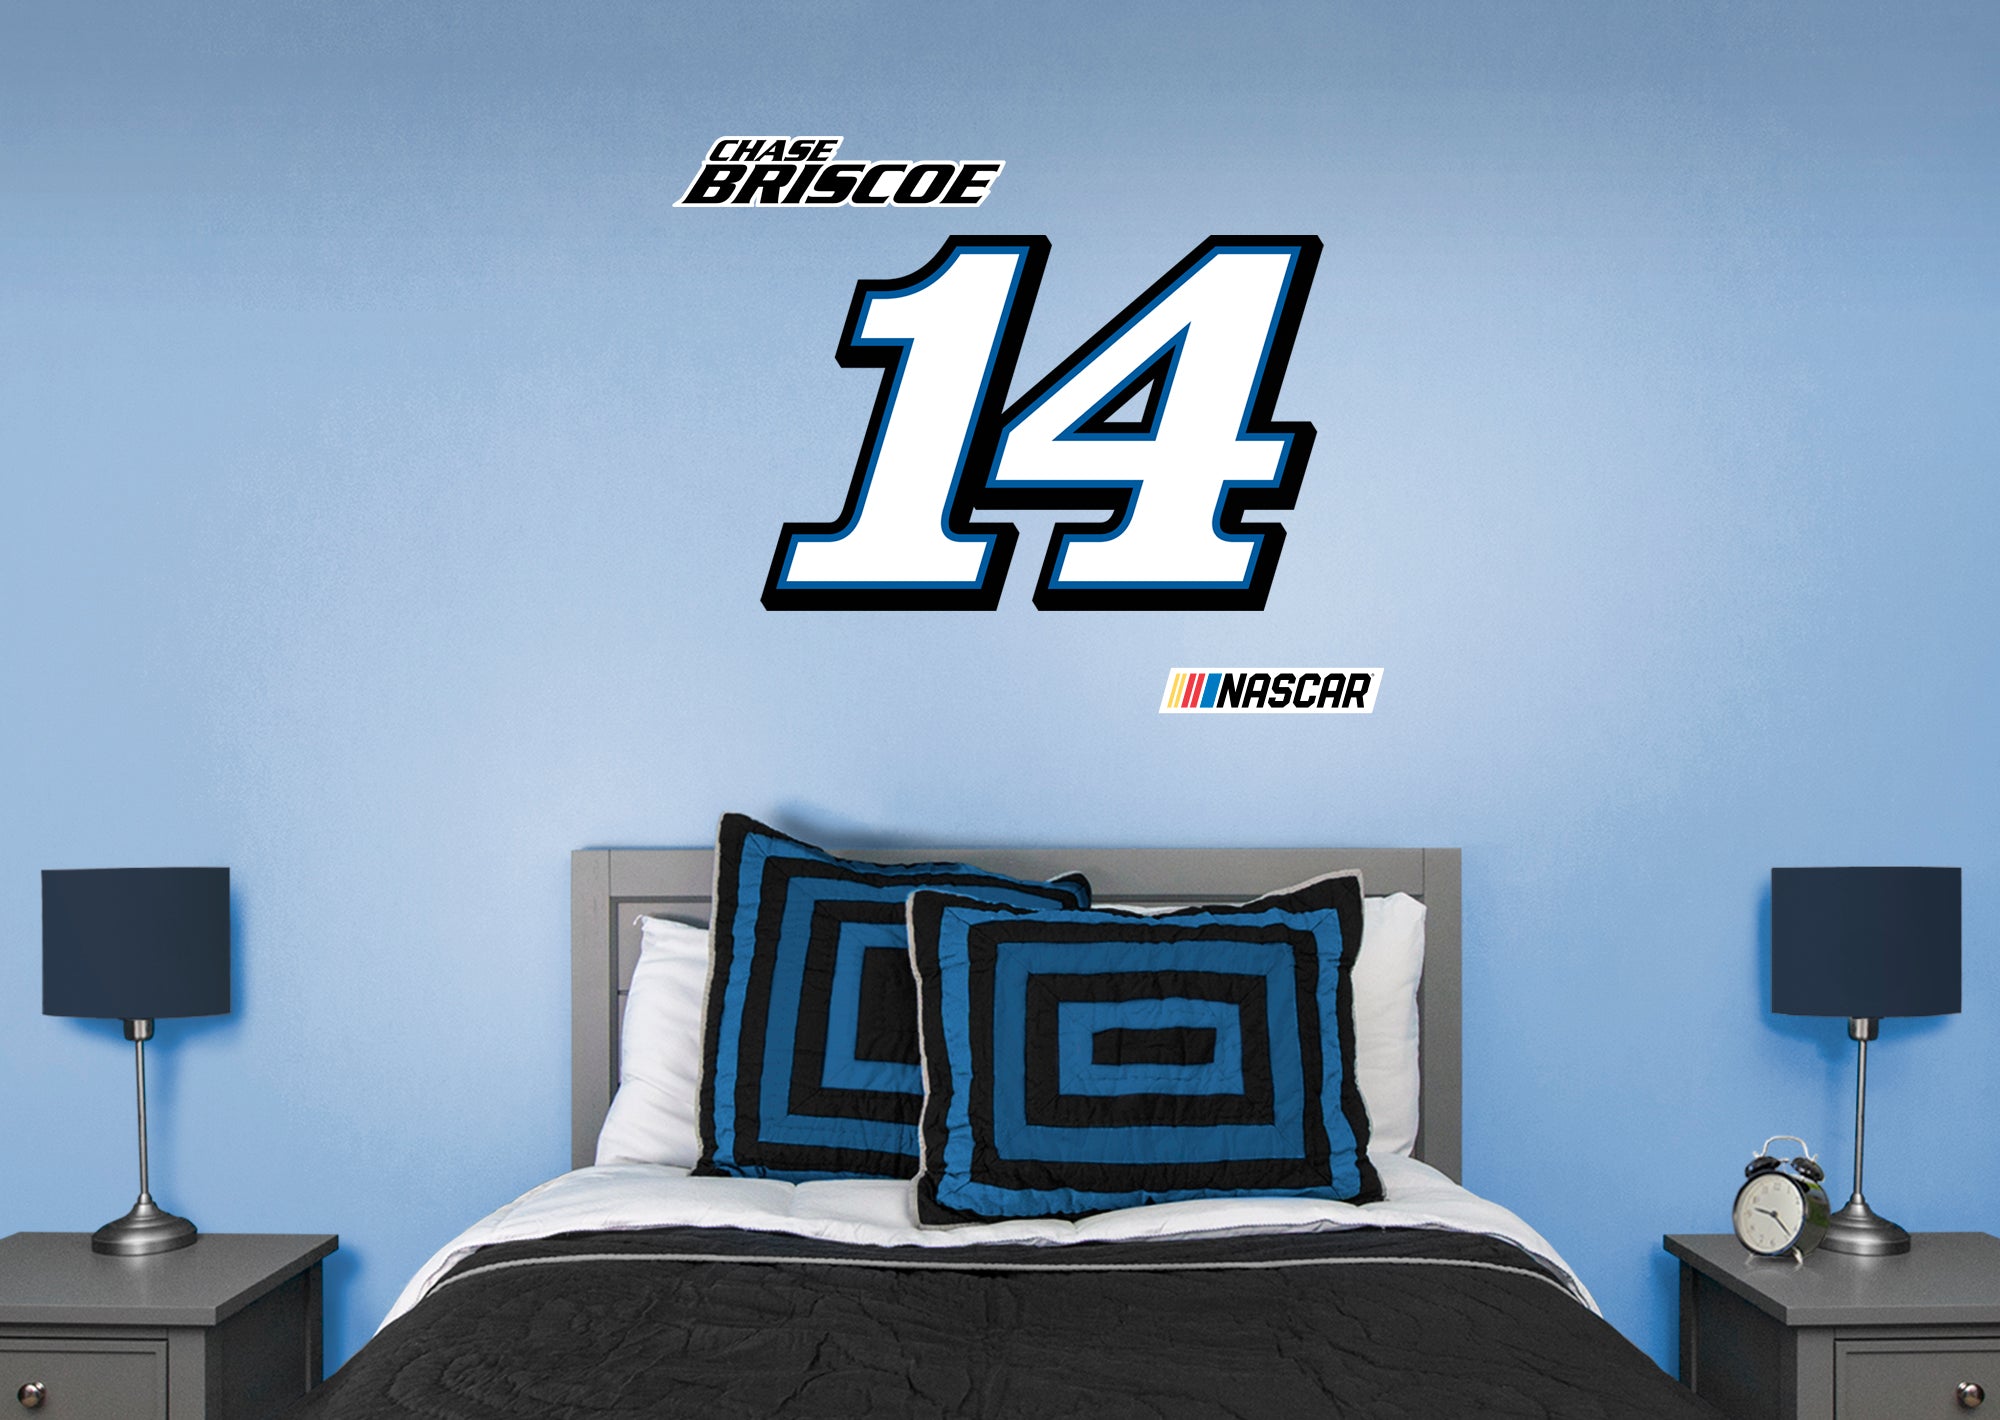 Chase Briscoe 2021 #14 Logo - Officially Licensed NASCAR Removable Wall Decal XL by Fathead | Vinyl